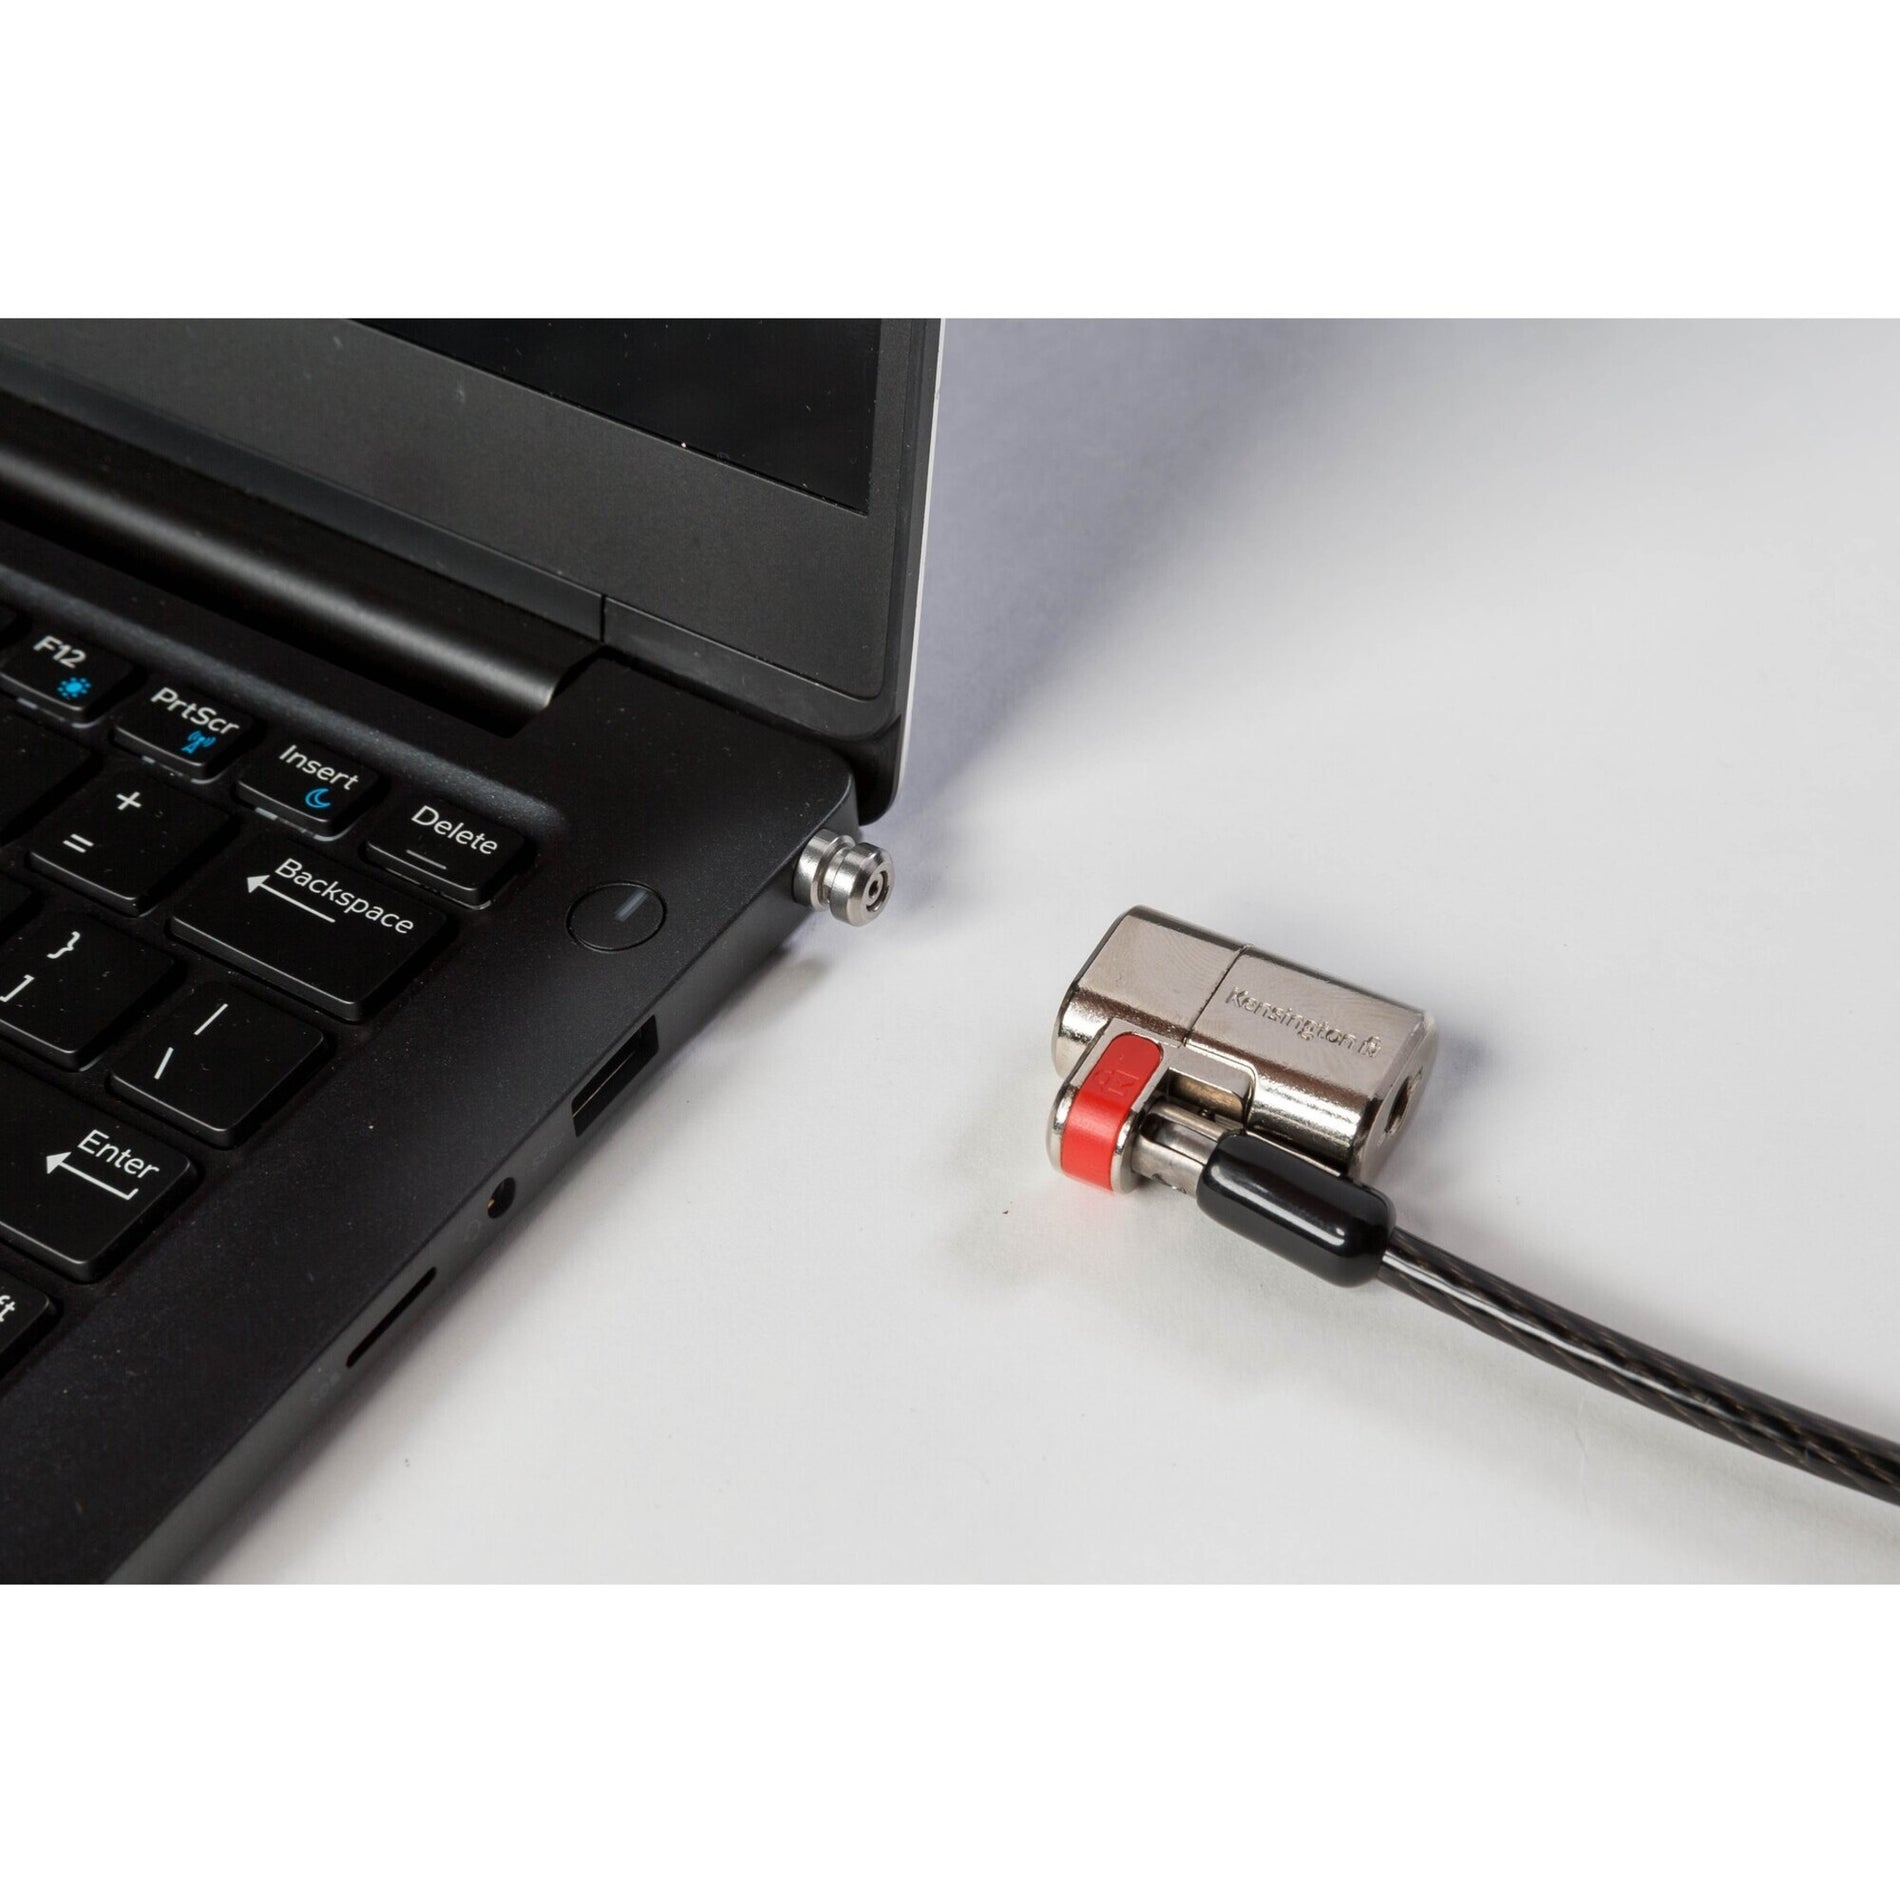 Kensington K67974WW ClickSafe Keyed Lock for Dell Laptops, Secure Your Laptop with Ease